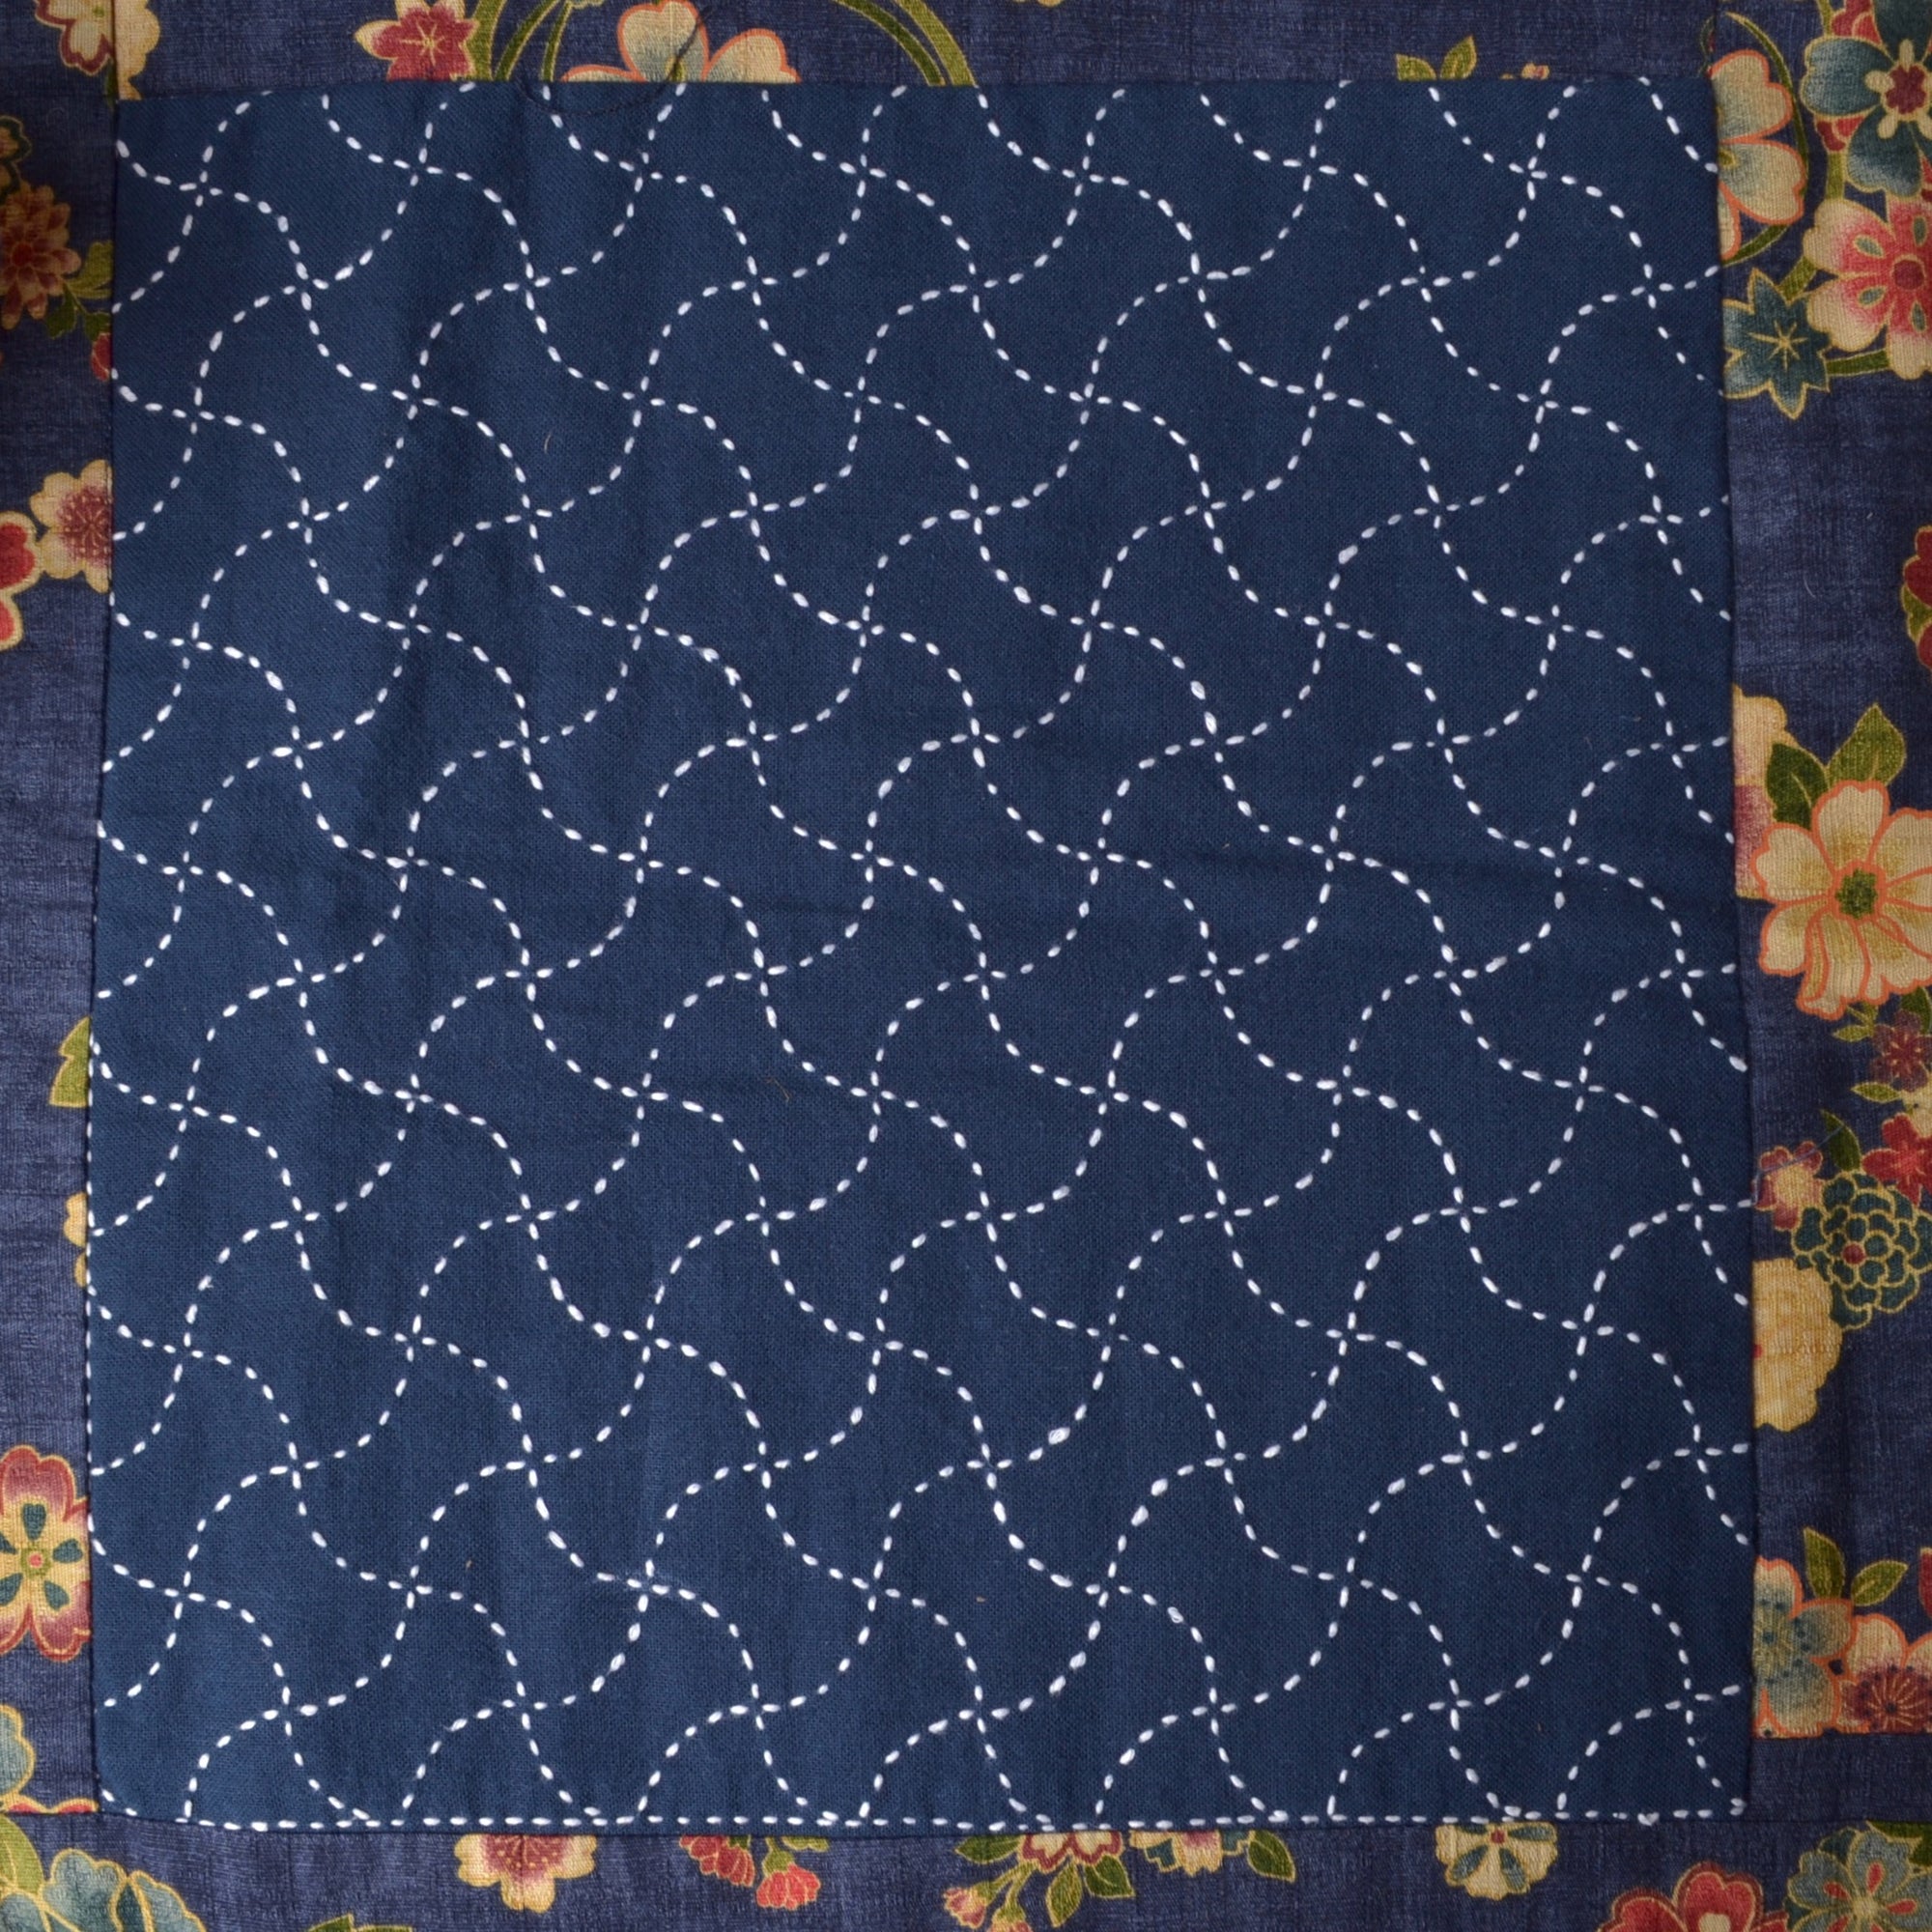 Cotton sashiko fabric with wash-out seven treasures pattern, blue